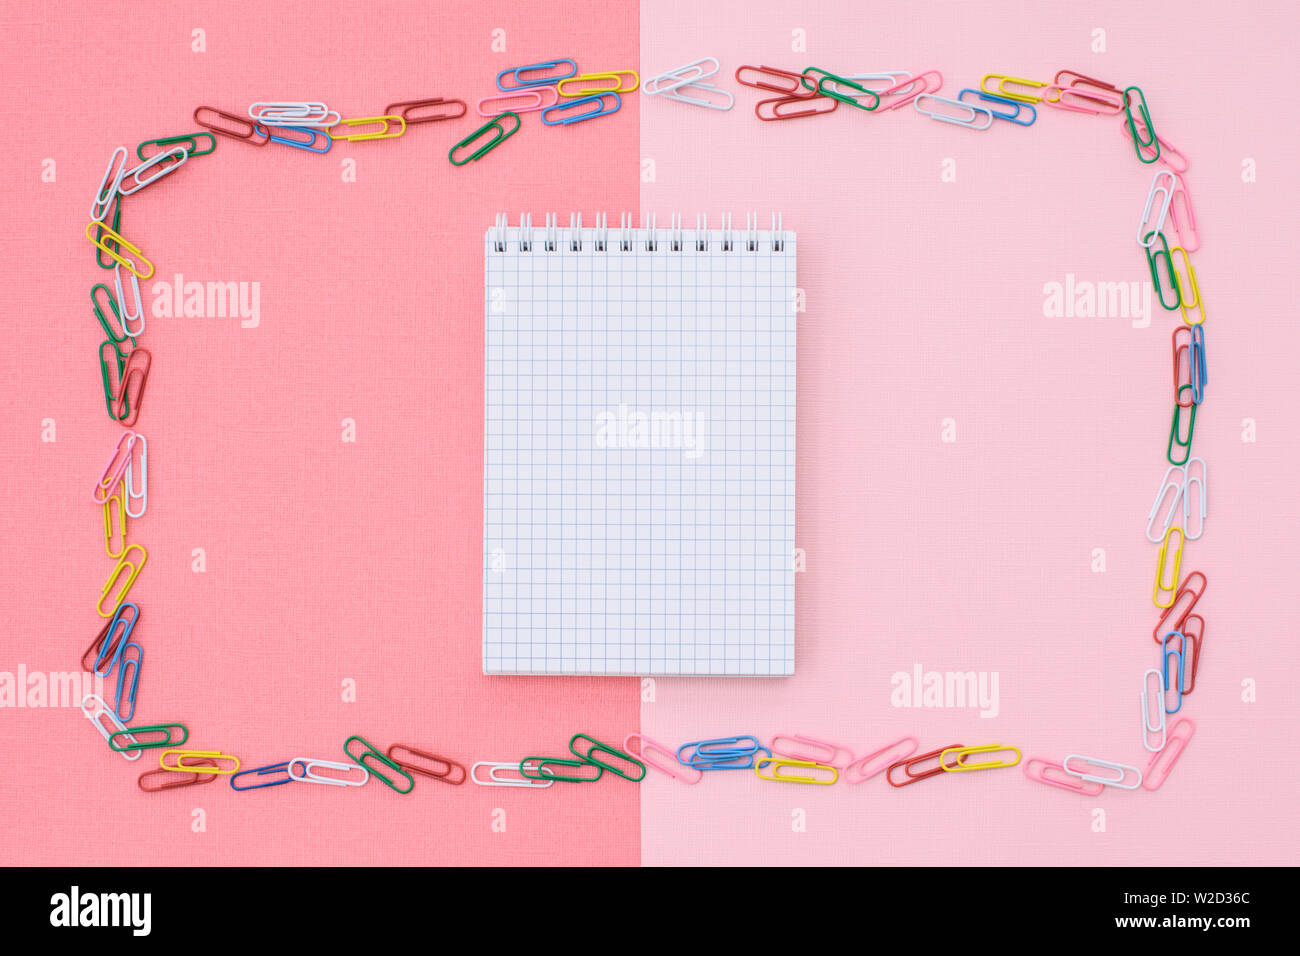 Notebook in cage in a frame of colored paper clips on a double background - pink and coral. Concept back to school. Stock Photo